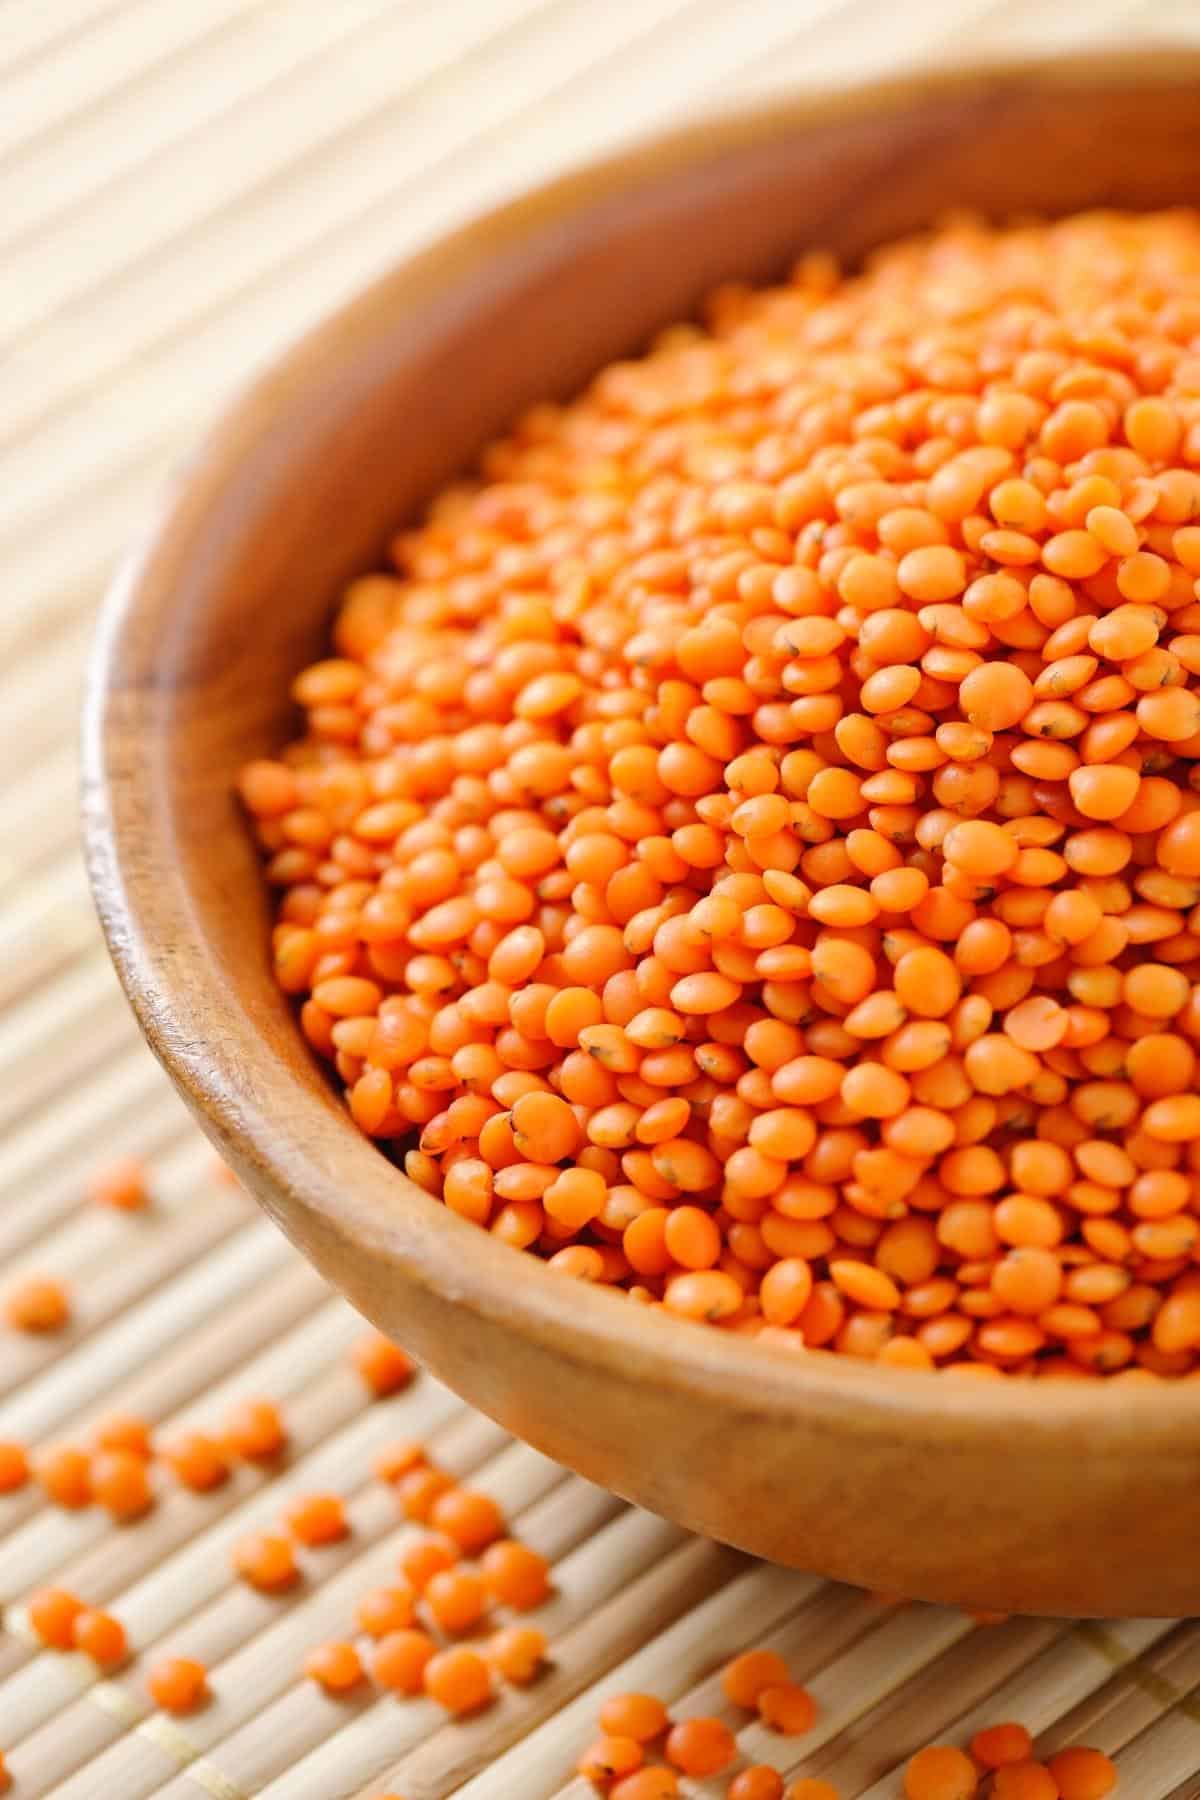 Dry red lentils in a bowl on a table.